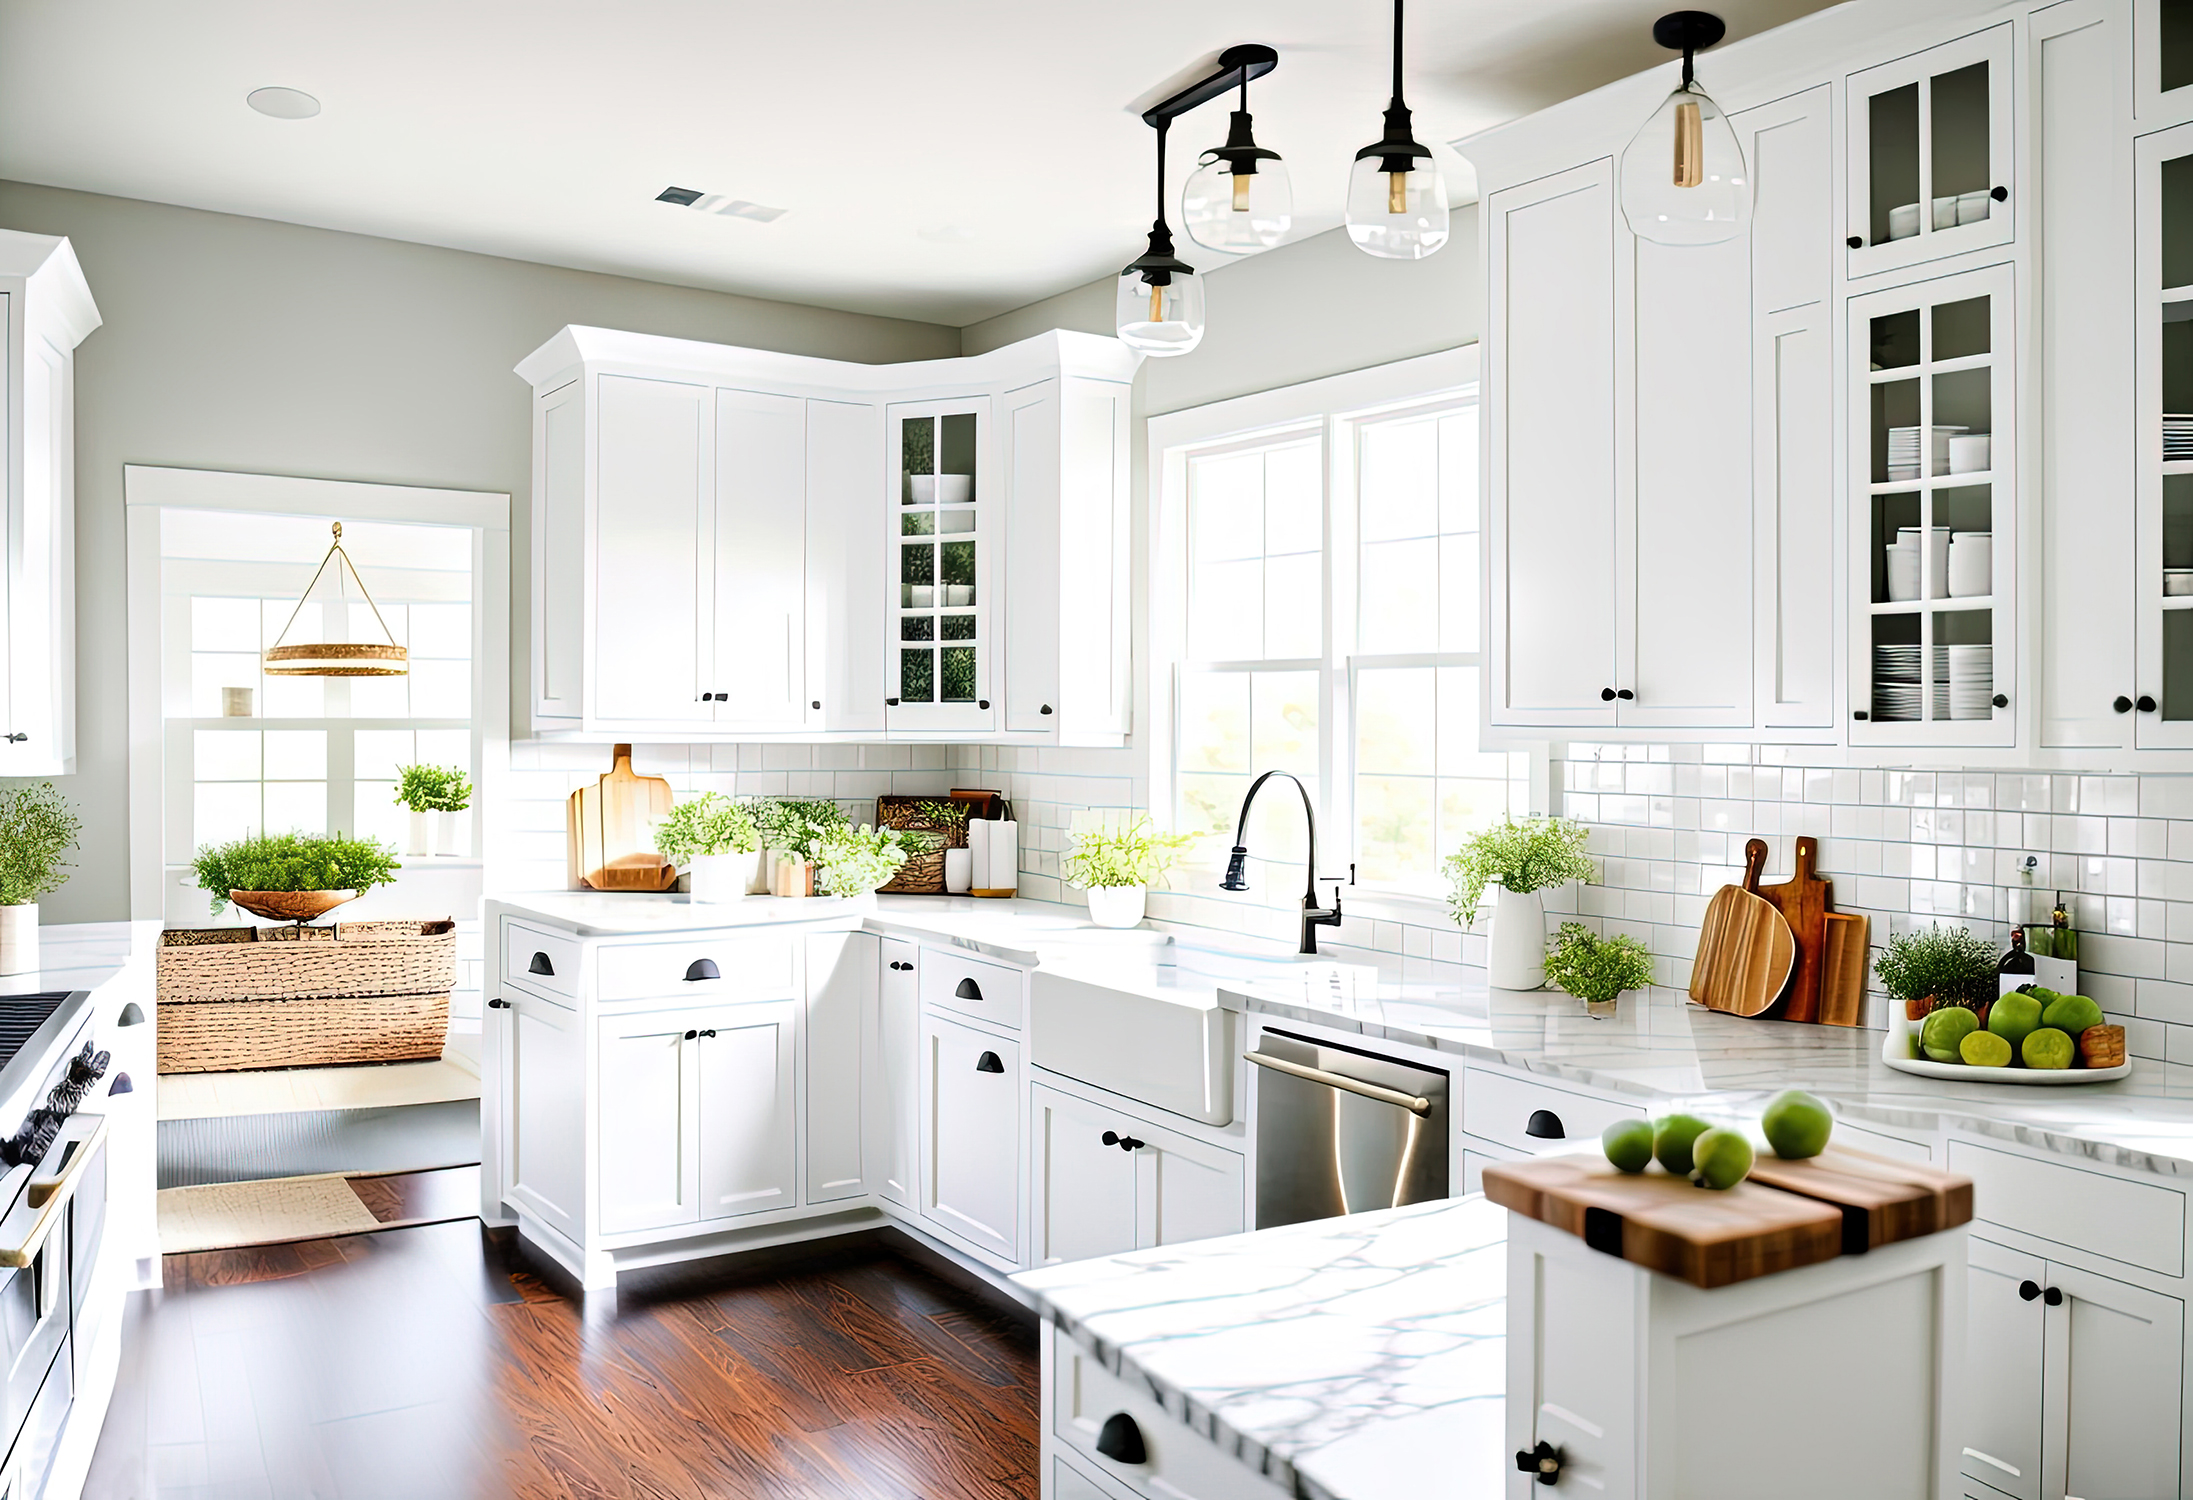 A Dream Kitchen For Every Decorating Style, Whats Ur Home Story